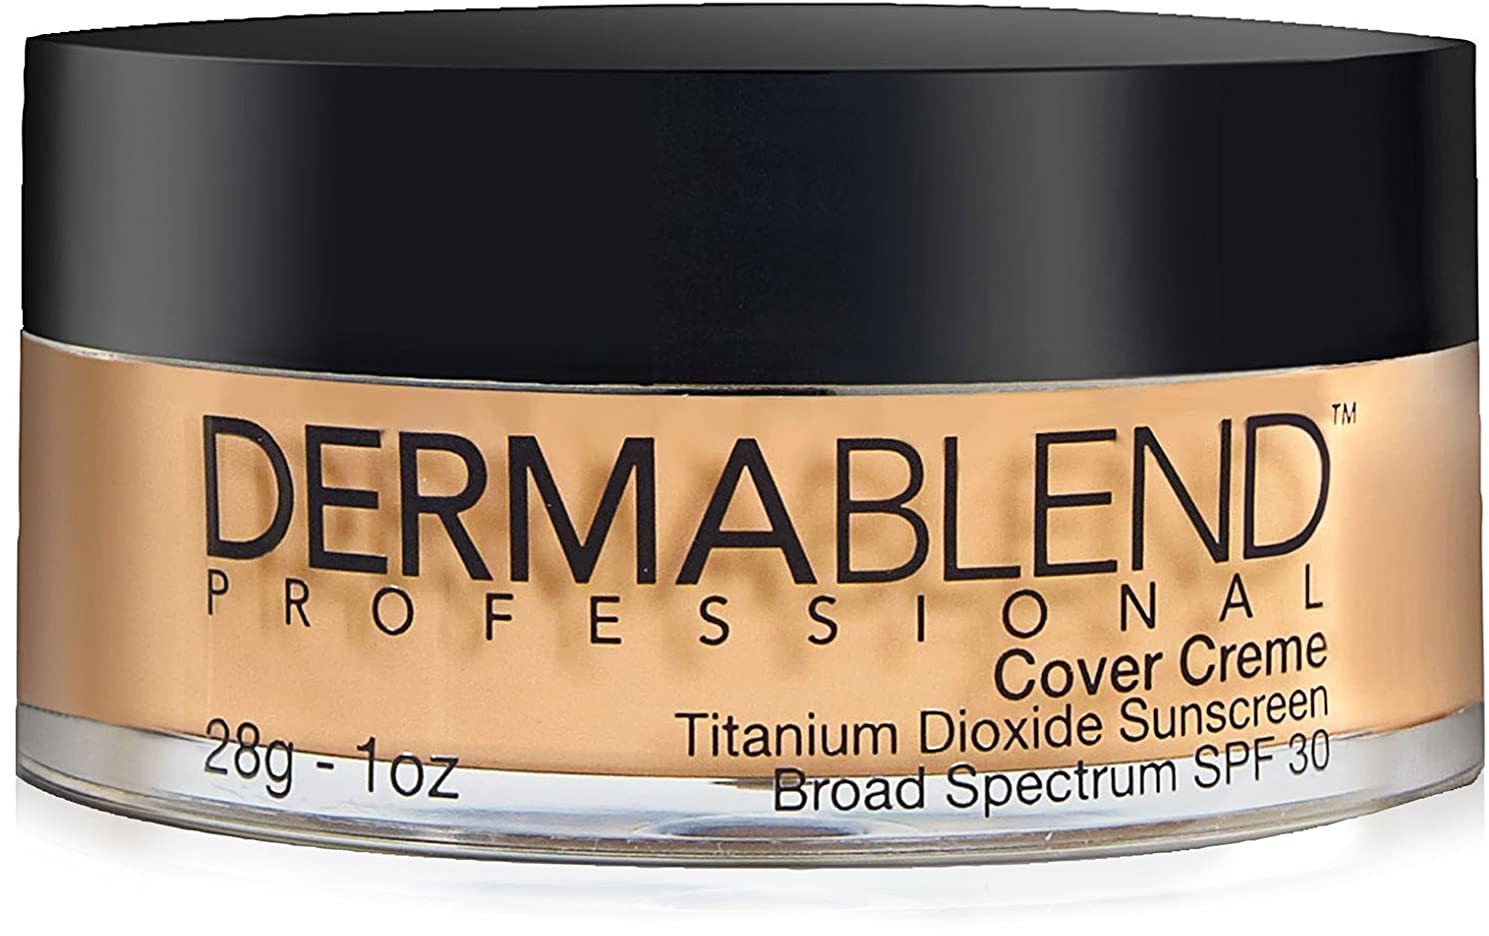 Dermablend Professional Cover Creme.